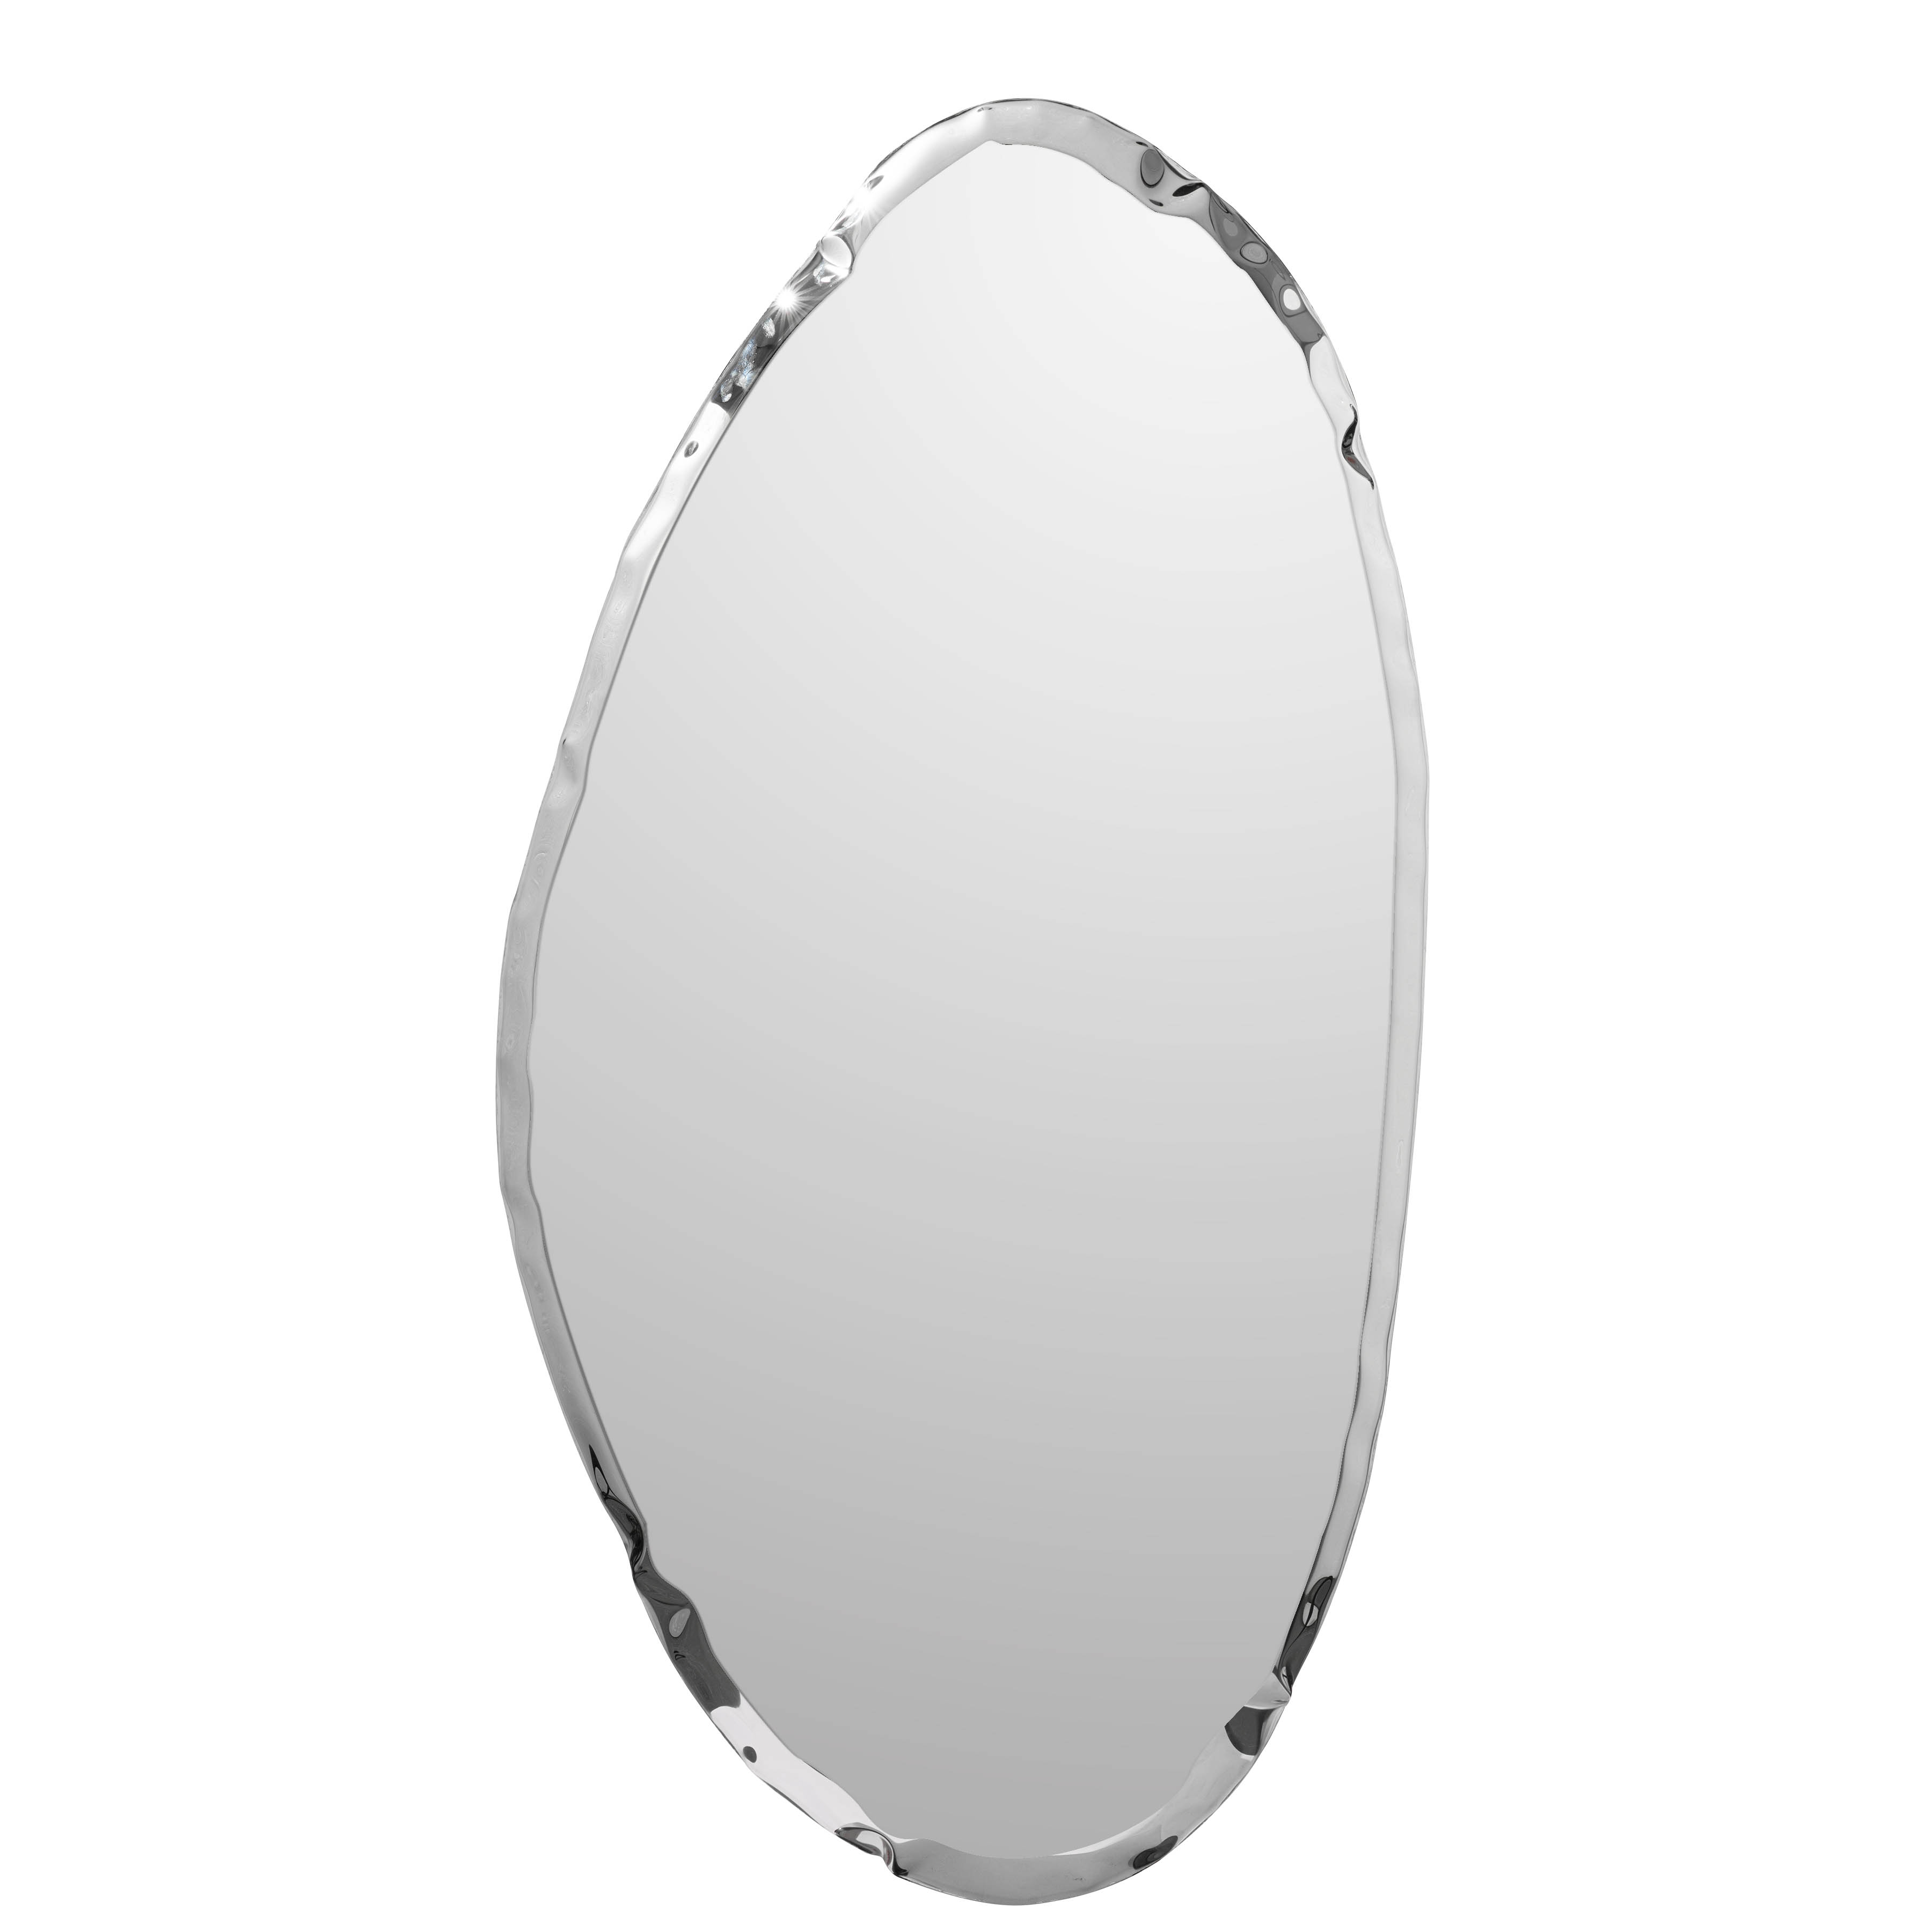 Tafla Abstract Wall Mounted Polished Stainless Steel Elliptic Drop Mirror / Large